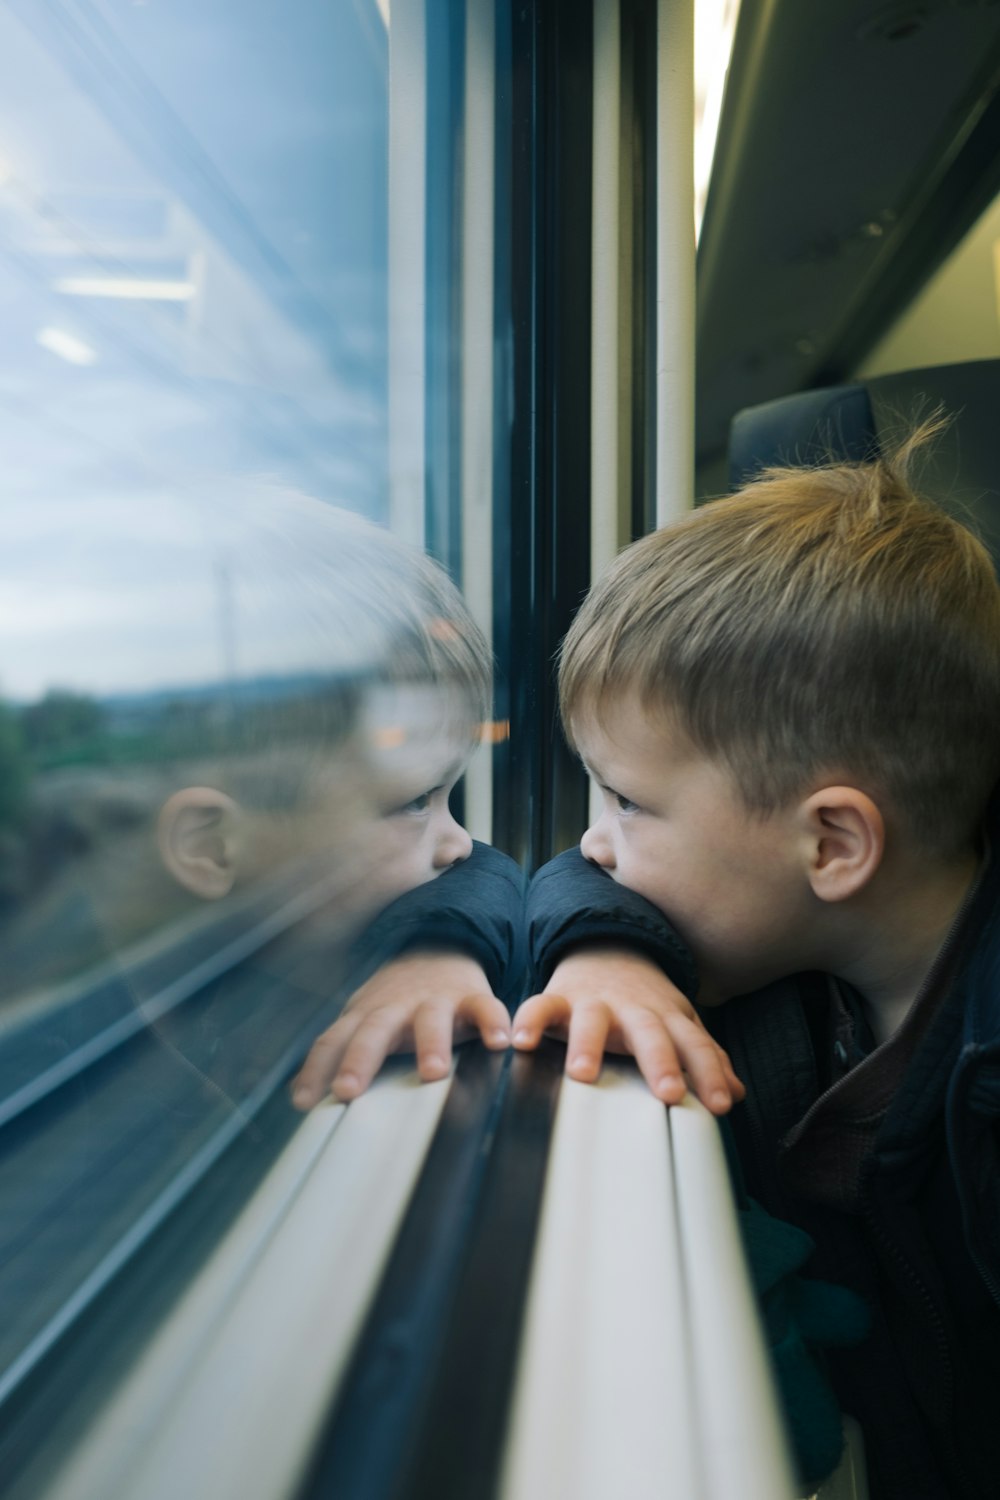 two young boys looking out the window of a train